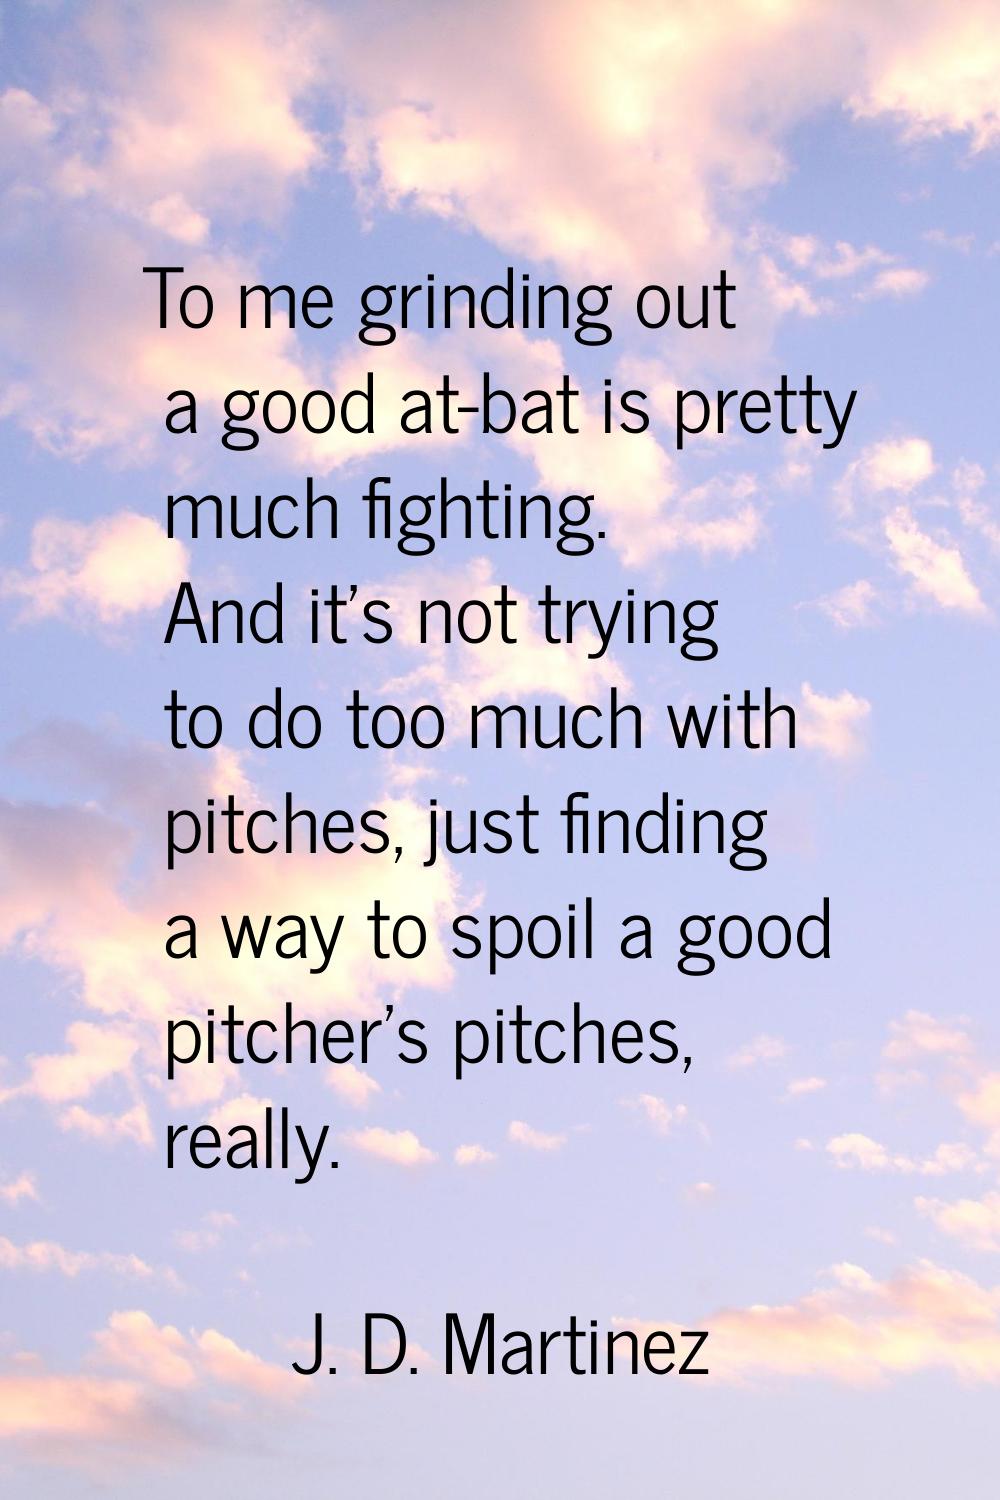 To me grinding out a good at-bat is pretty much fighting. And it's not trying to do too much with p